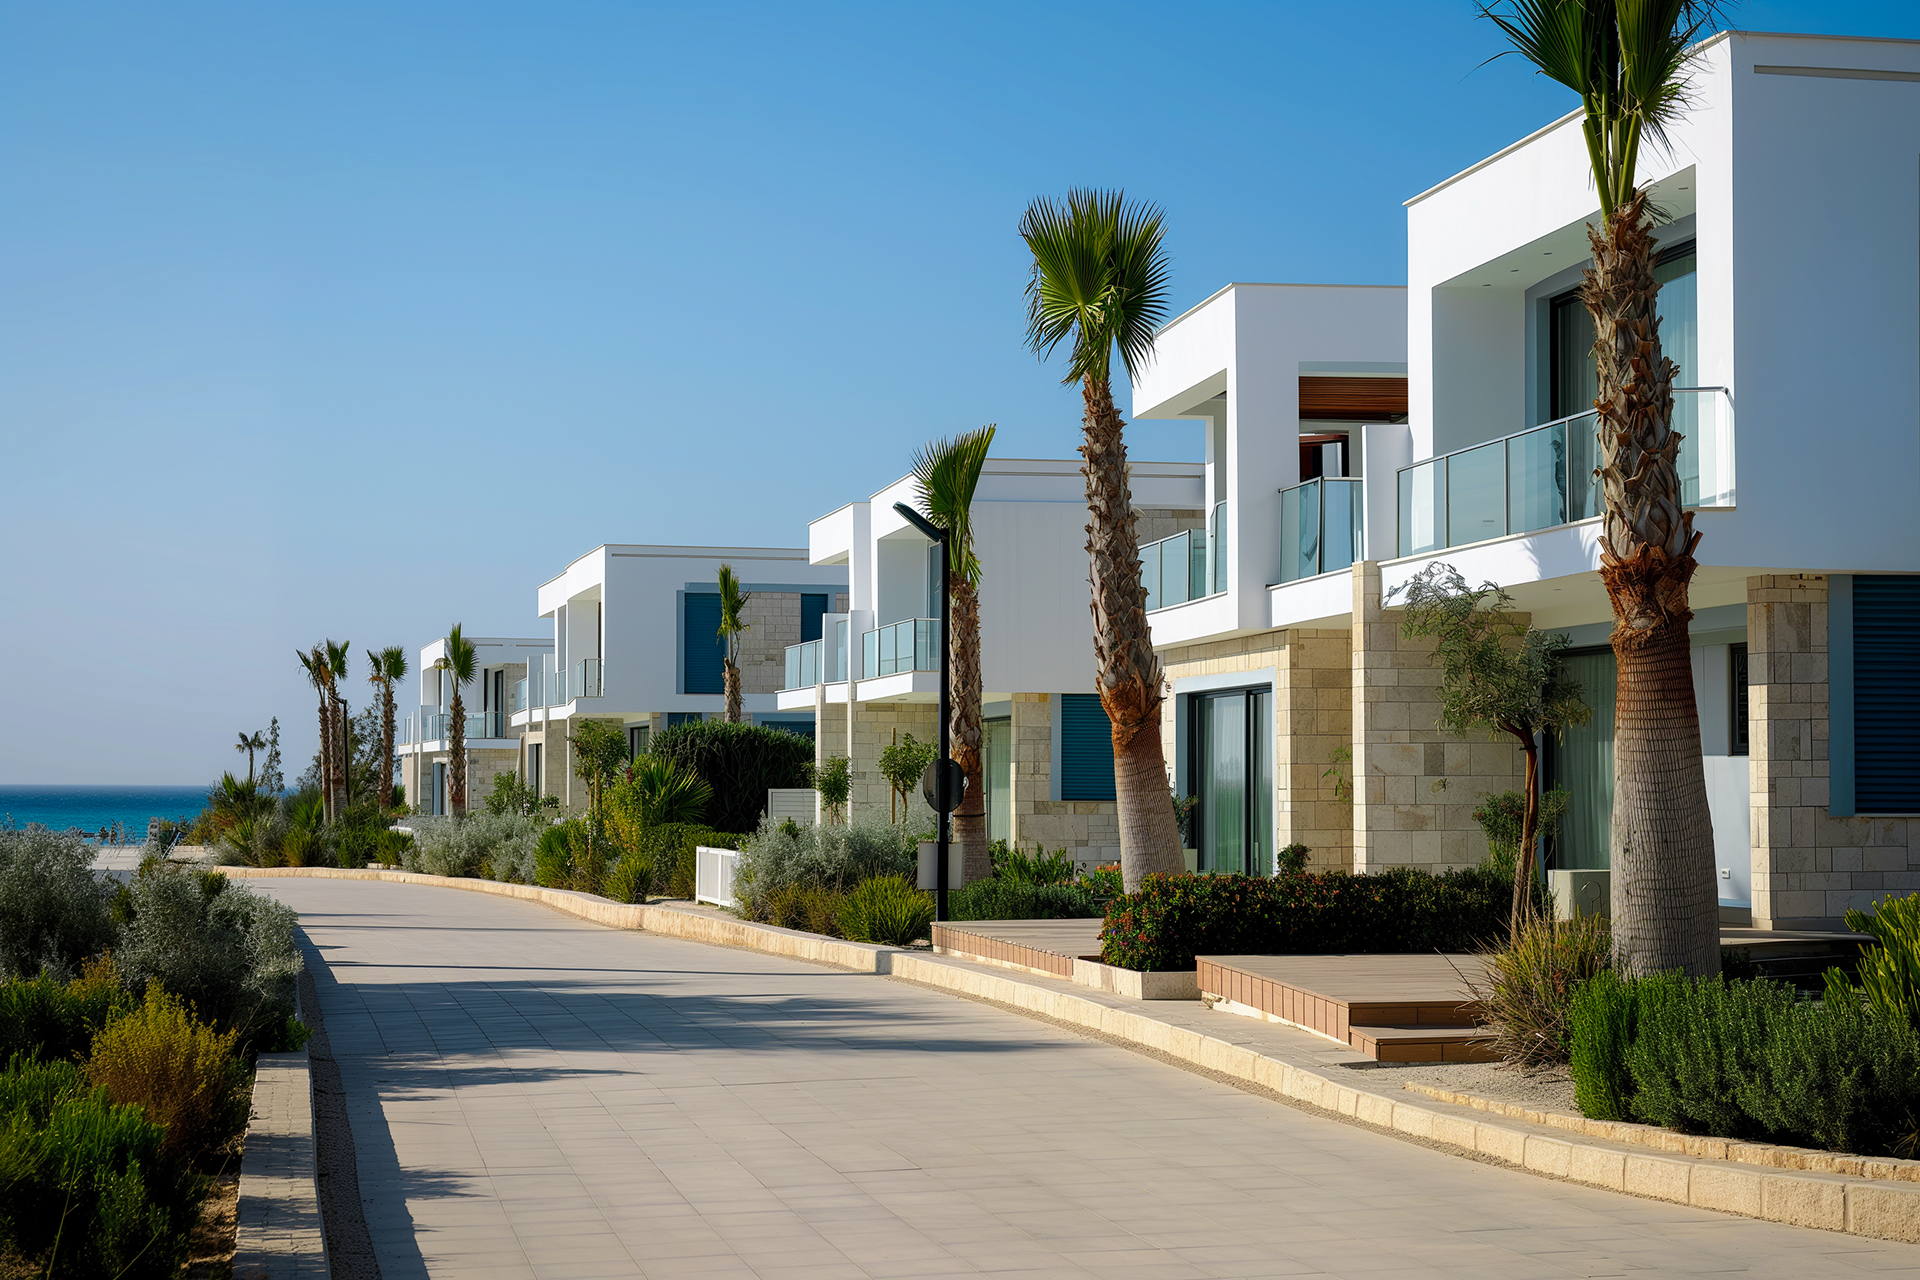 Buying a home abroad: exploring real estate opportunities in Cyprus